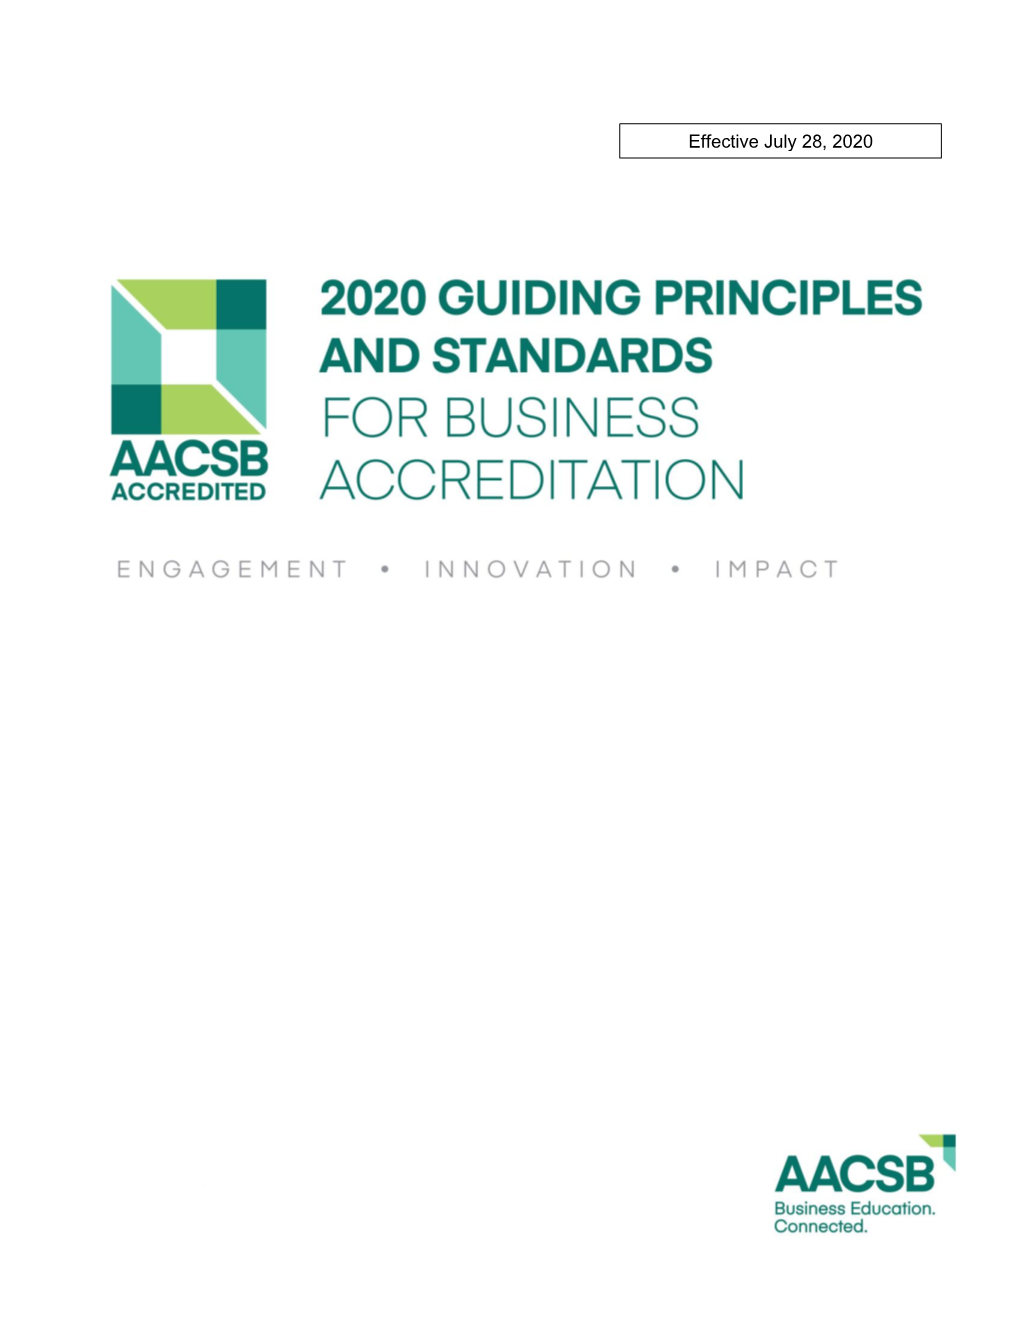 2020 Business Accreditation Standards in Service to AACSB’S Membership